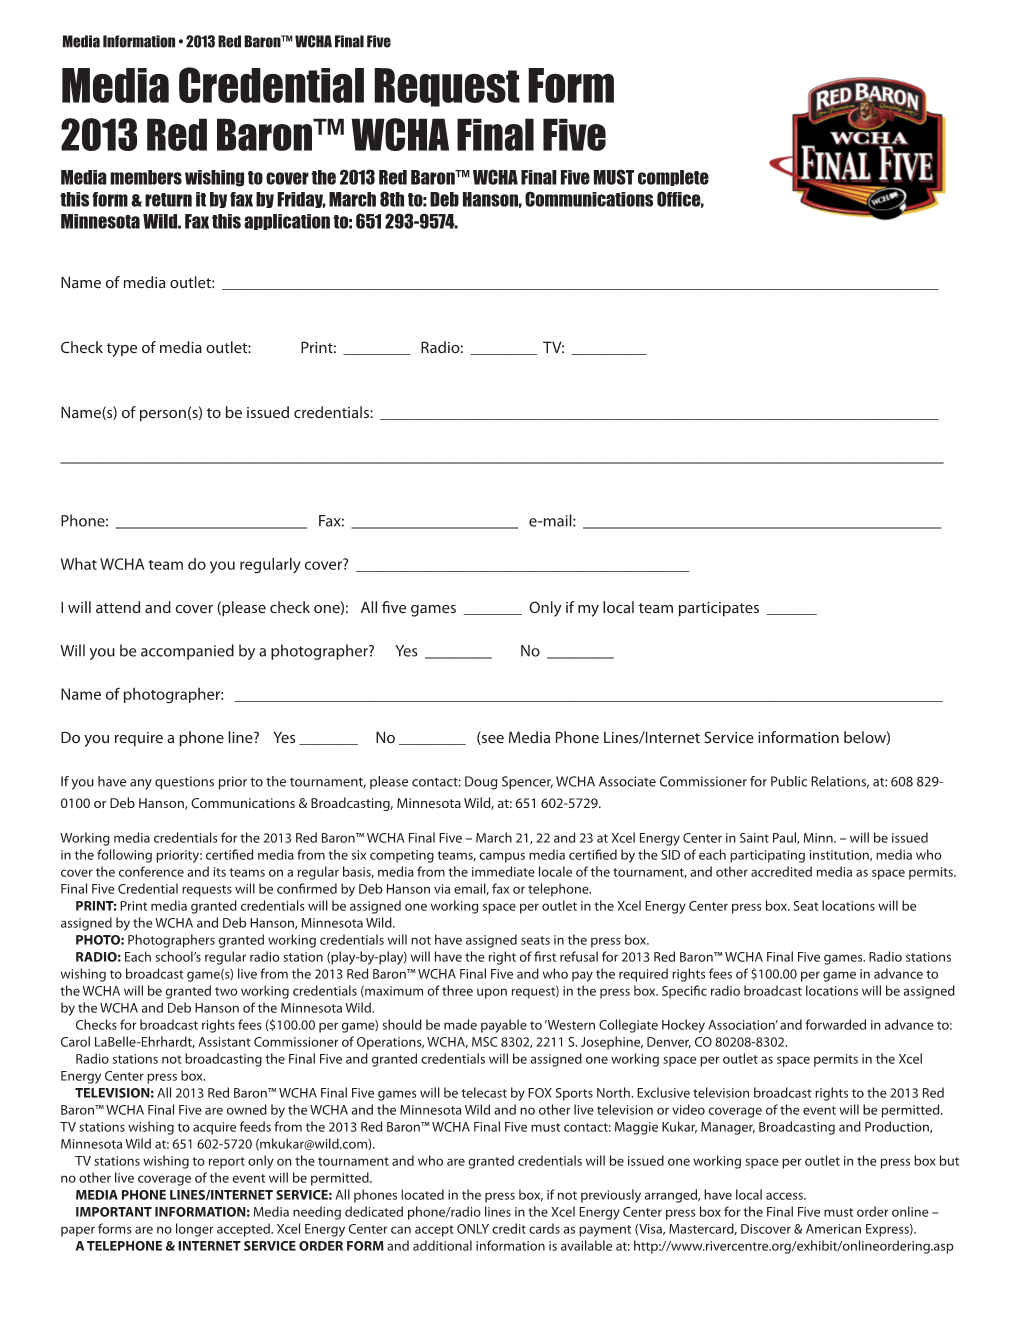 Media Credential Request Form